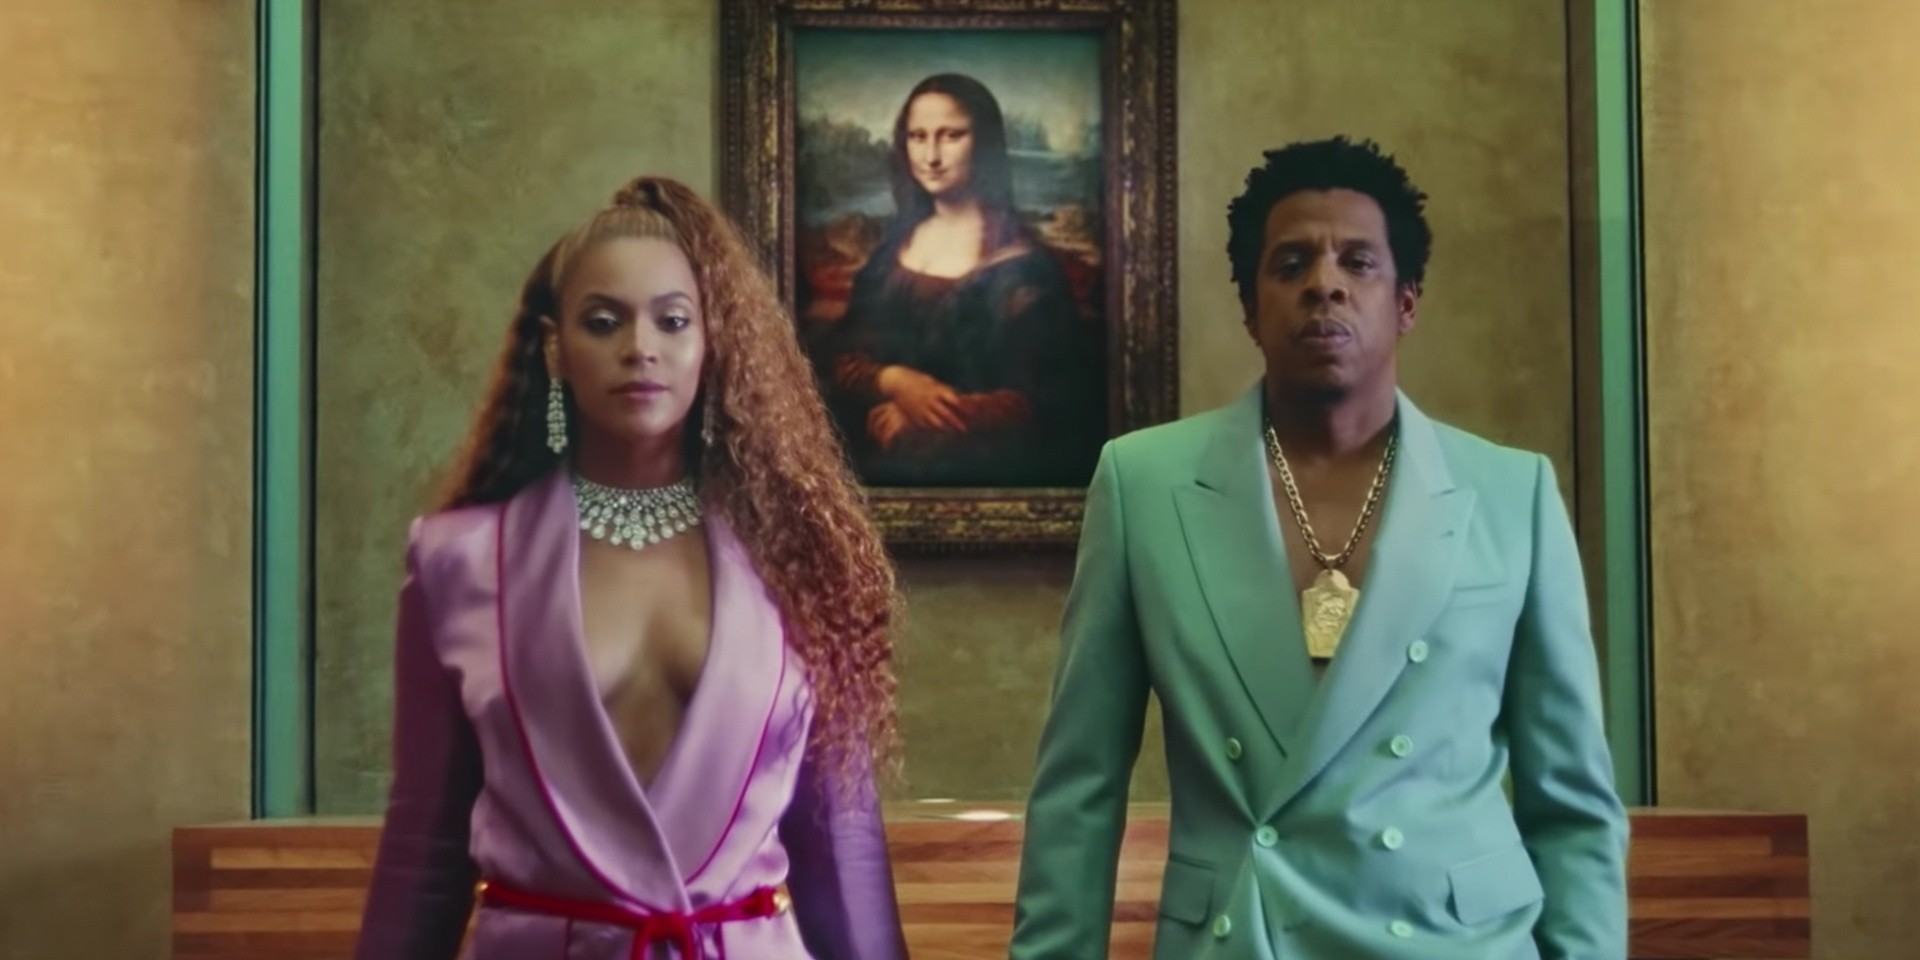 Beyoncé and Jay-Z take over the Louvre in music video for 'APESHIT' off new joint album – watch